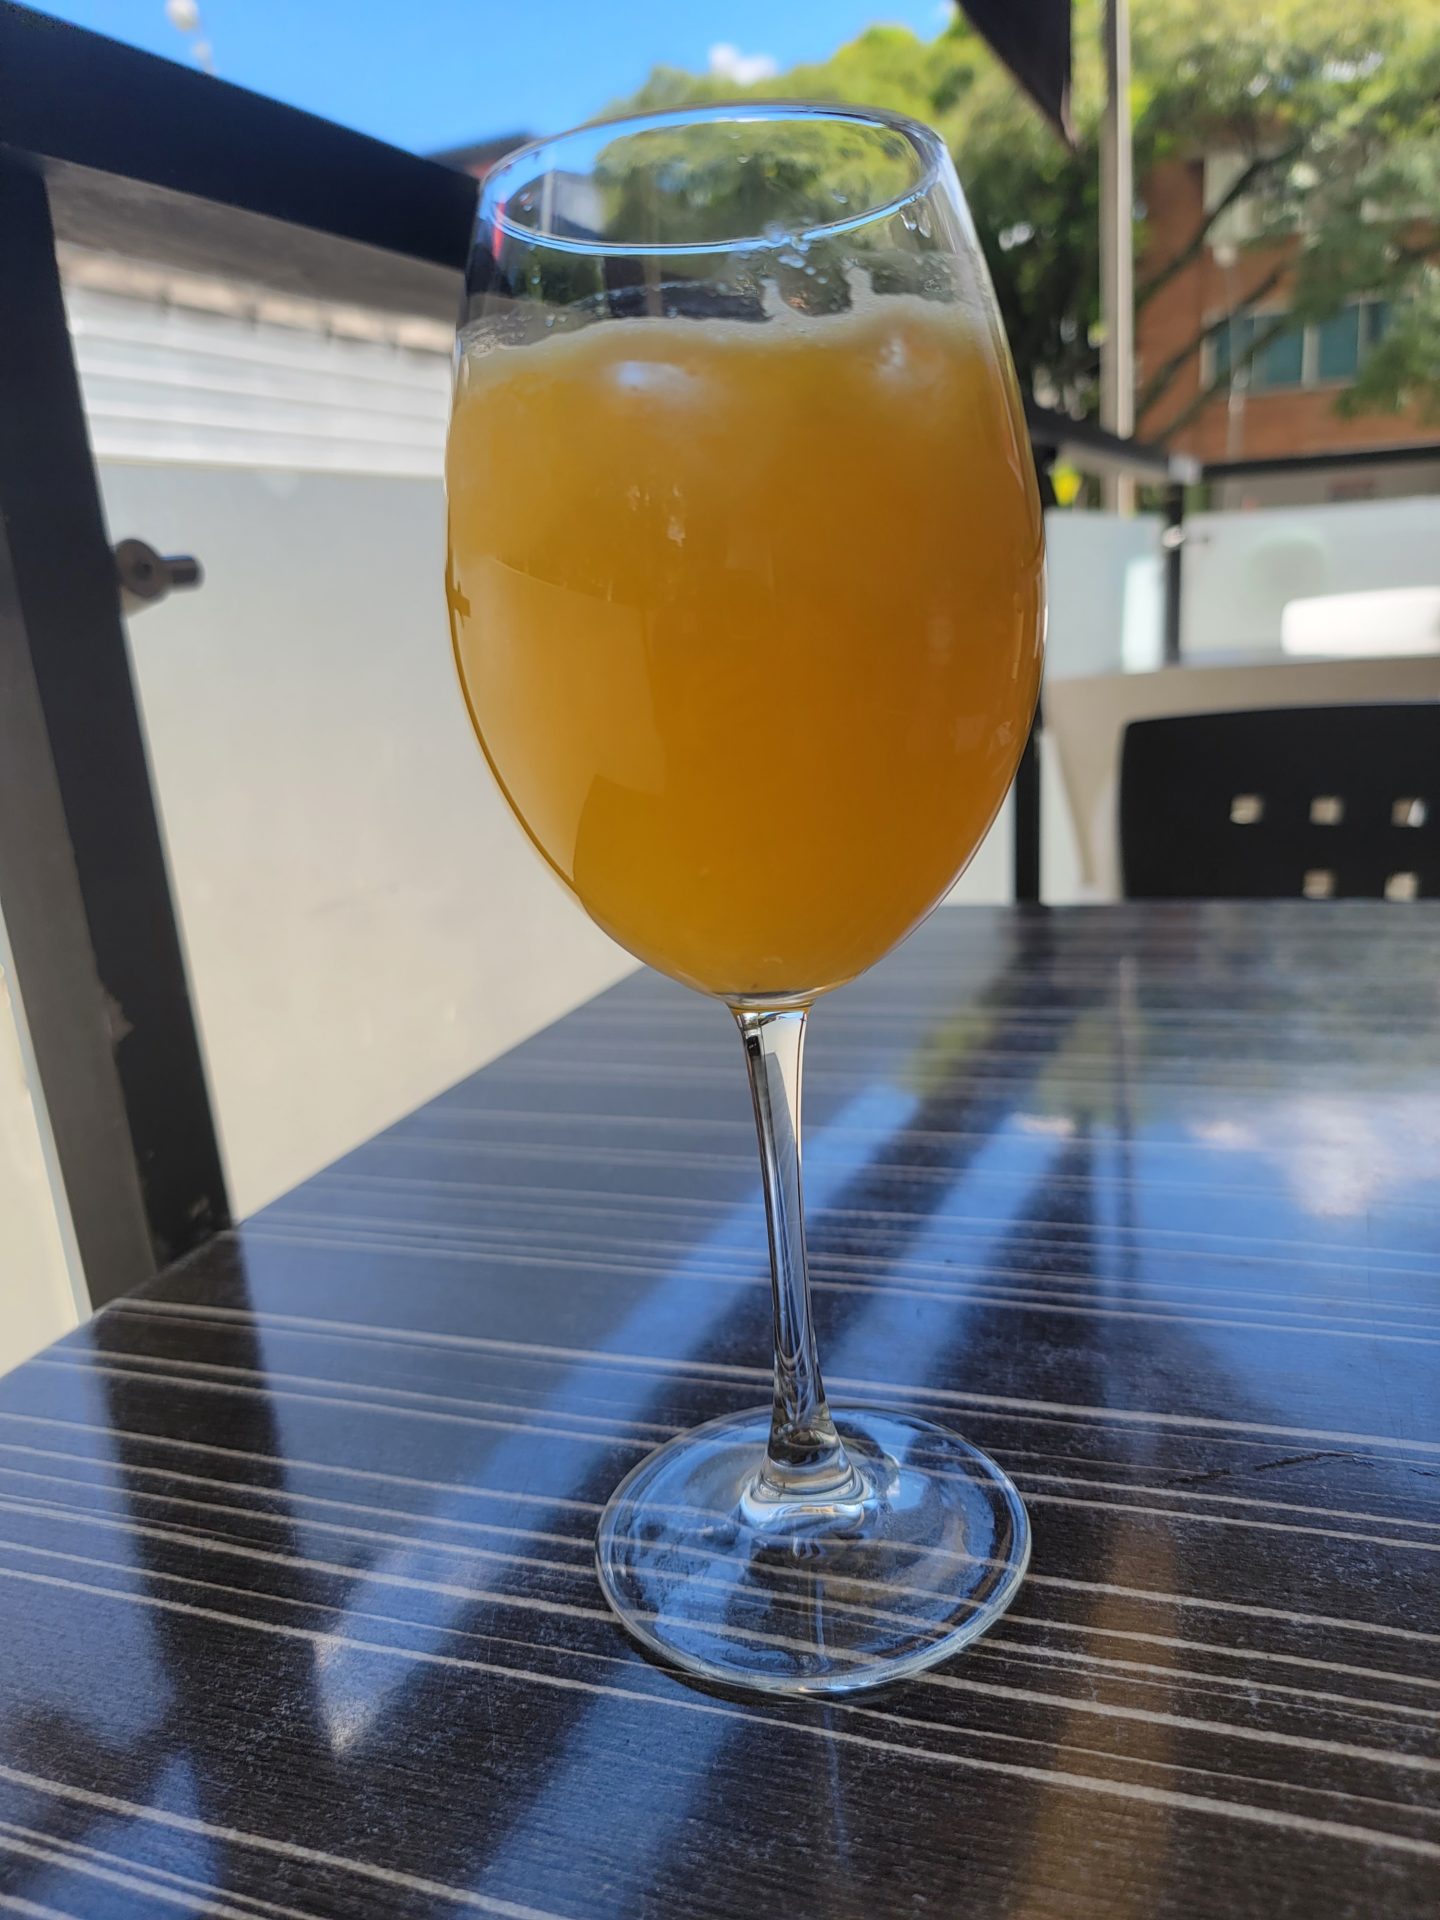 a glass of orange liquid on a table